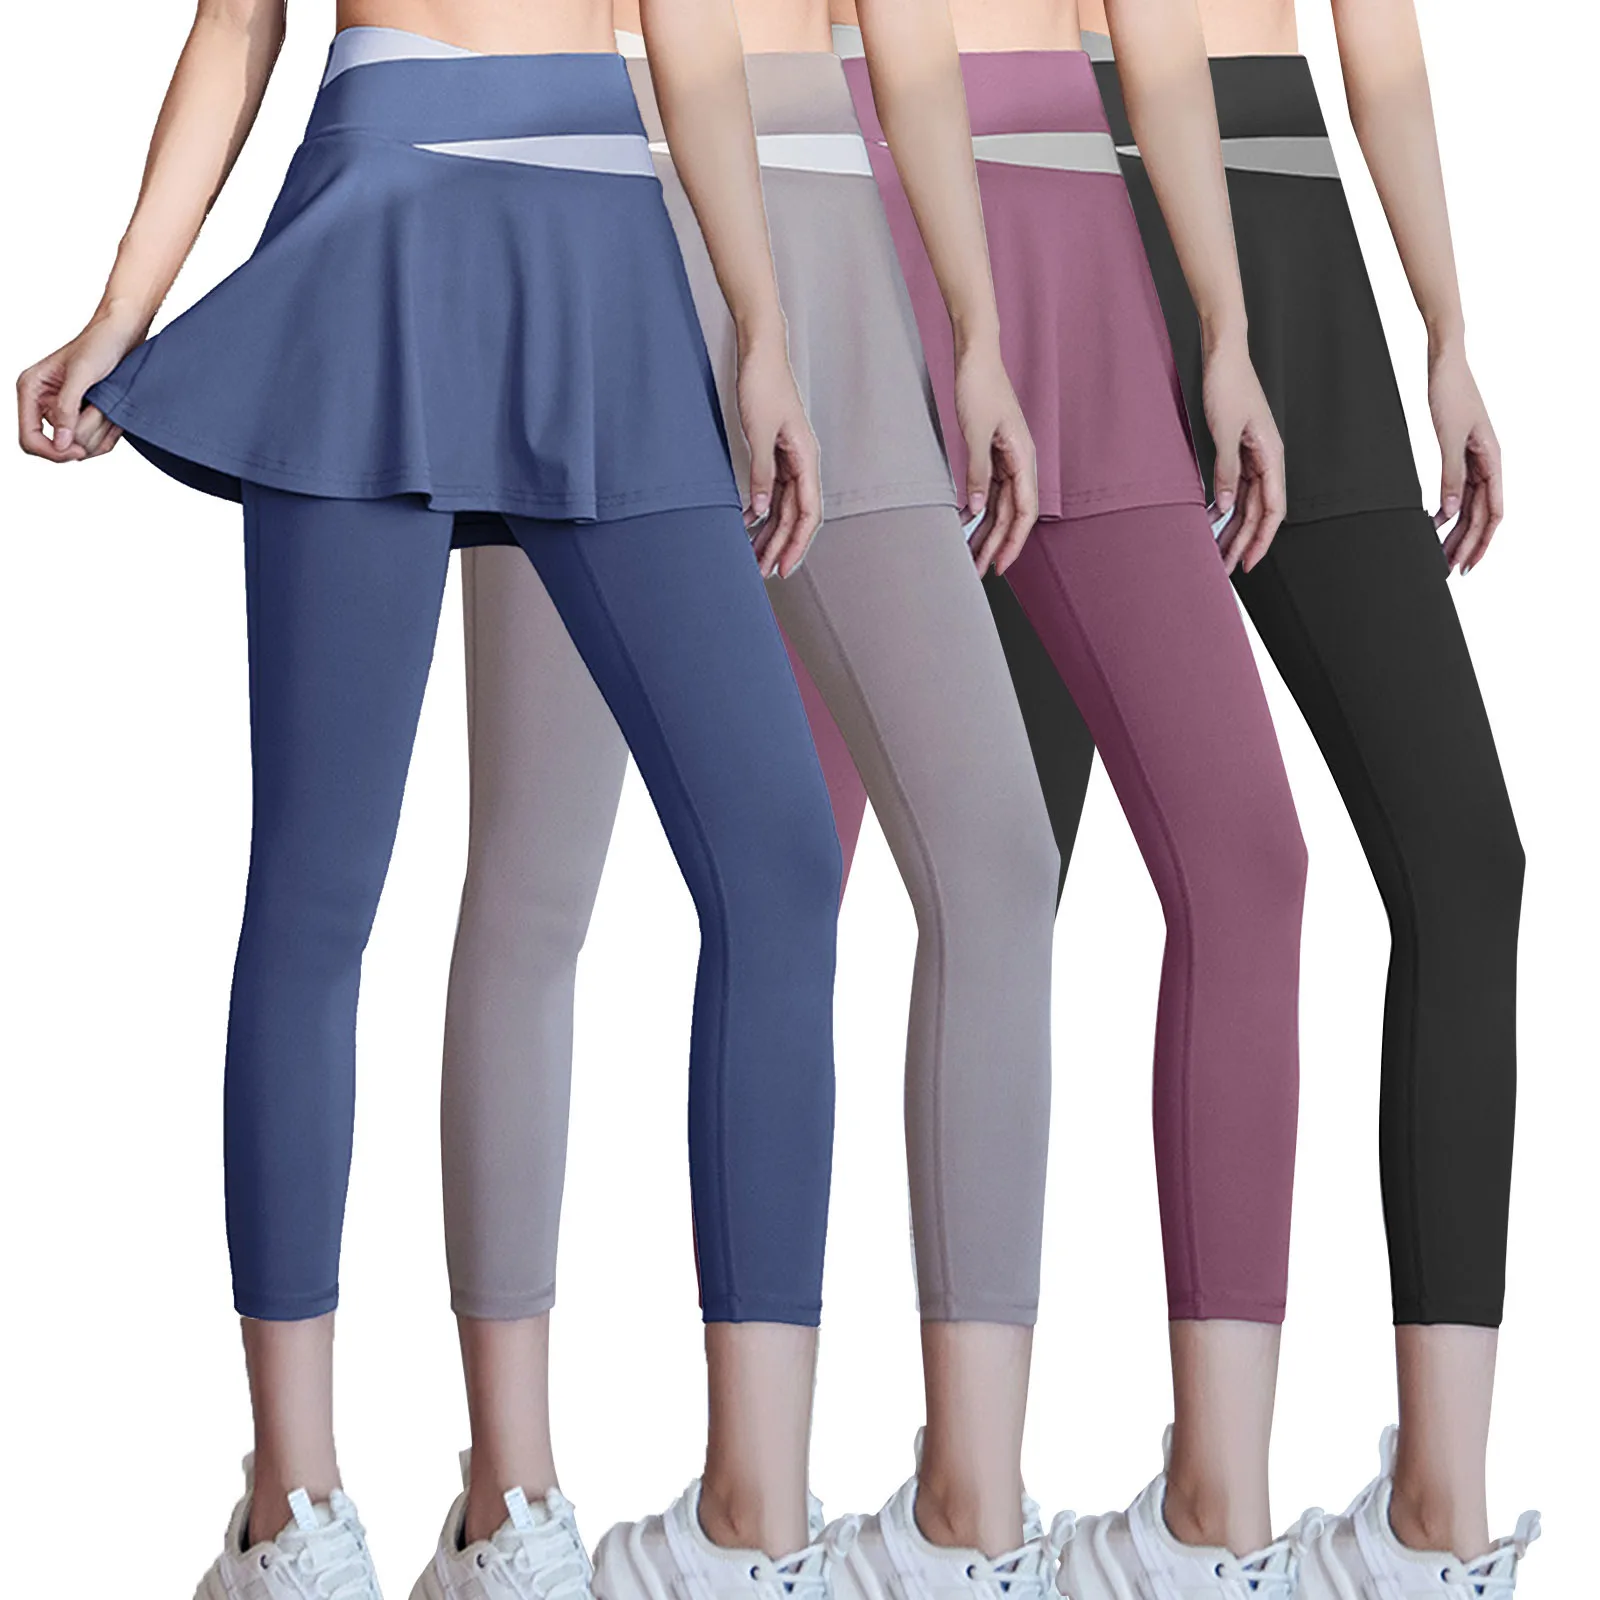 Women Fitness Yoga Pants With Skirt Fake Two Pieces Sport Legging Gym Dance Running Jogging Cycling High Waist Tight Pants